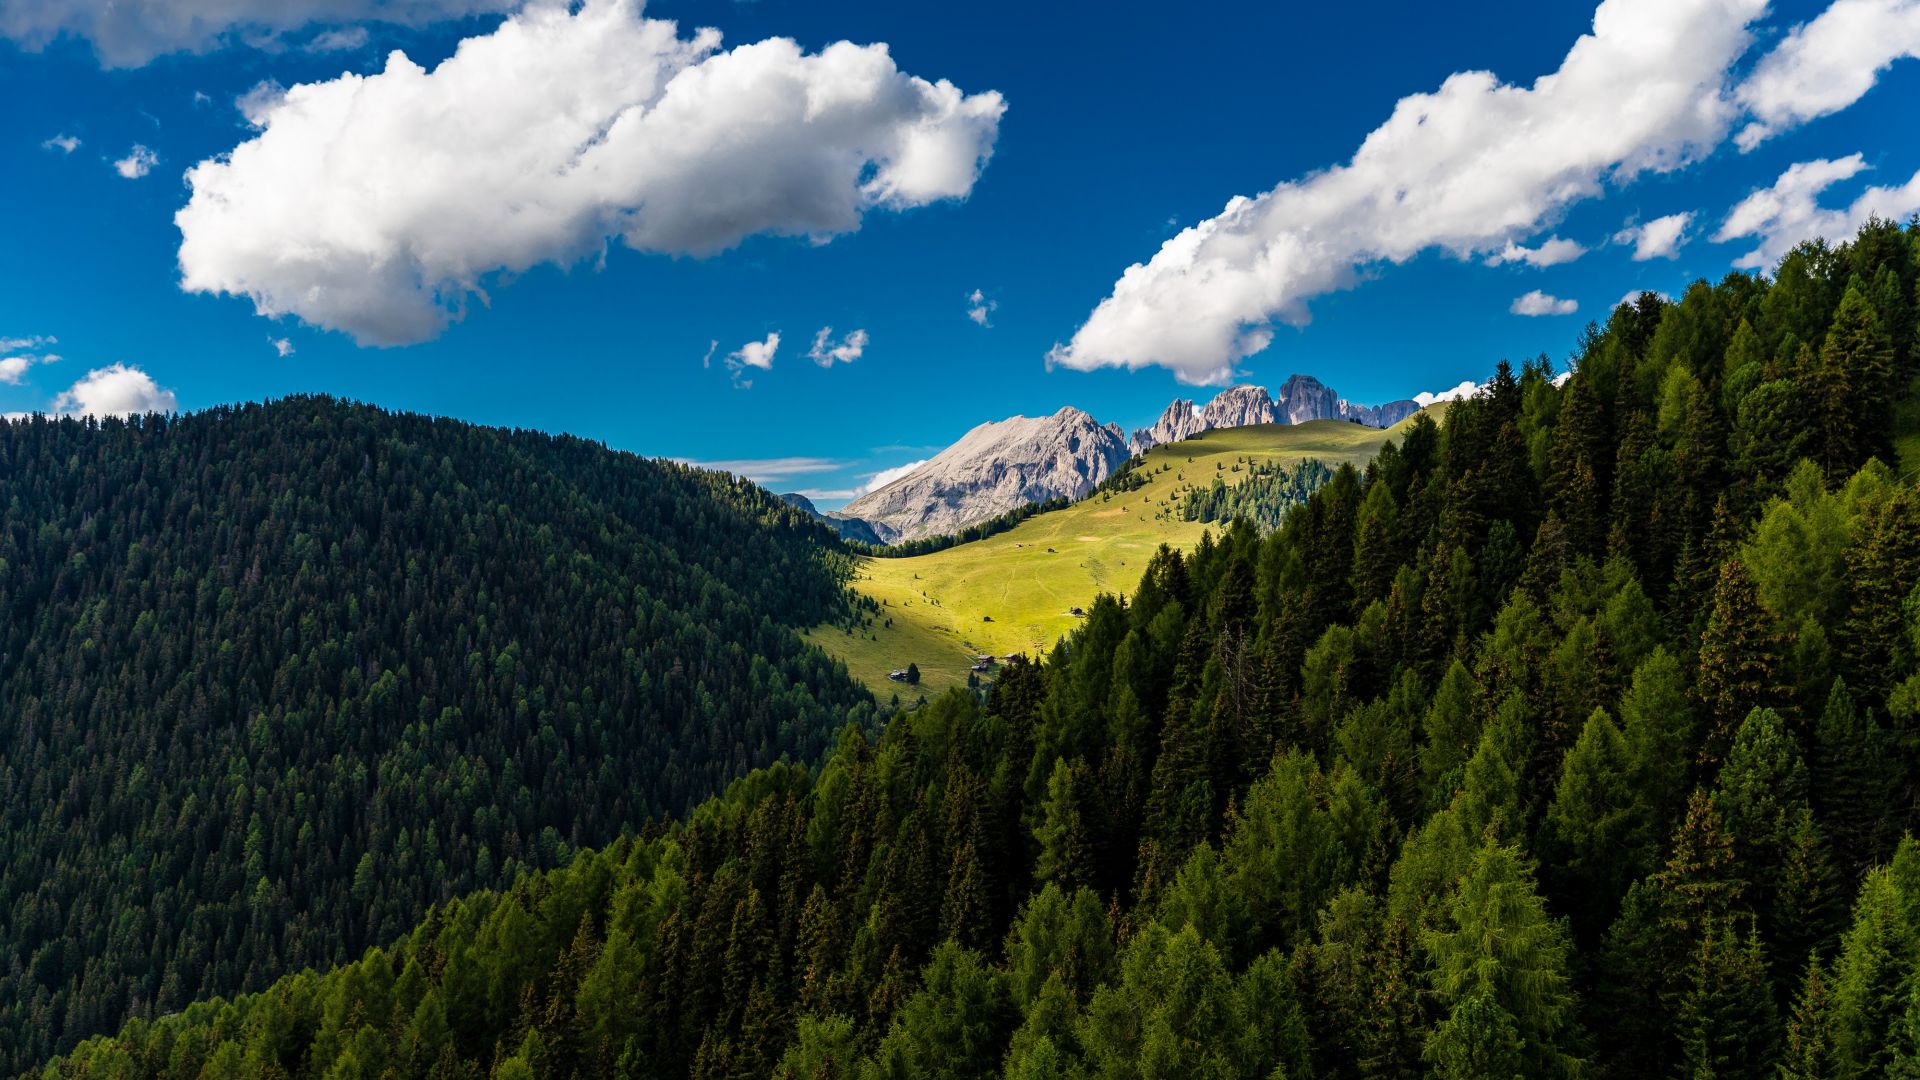 Trees, mountains, clouds, summer, sunny day wallpaper, HD image, picture, background, f43Da1